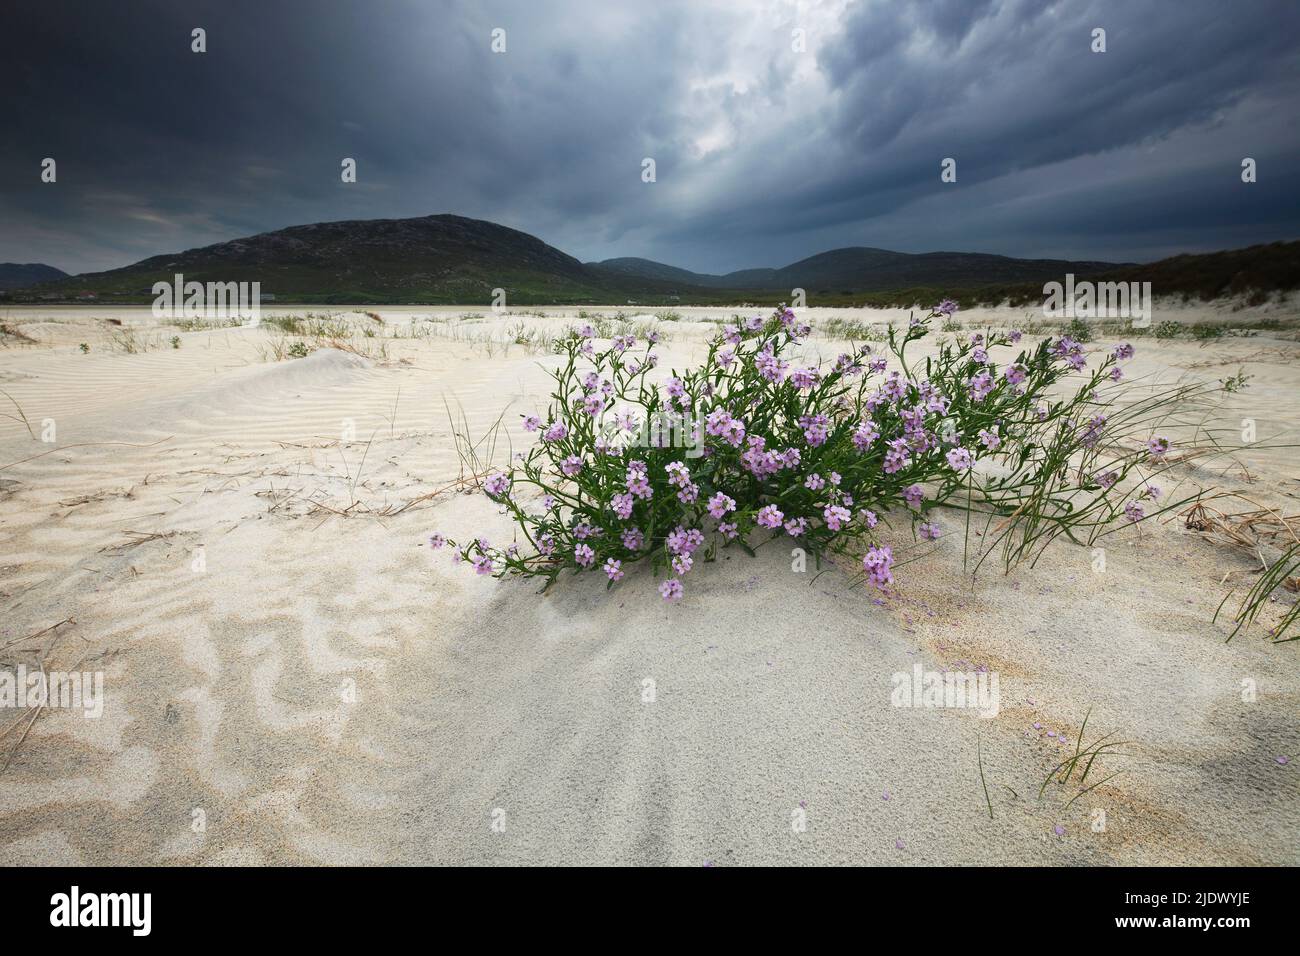 Sea Rocket - Cakile maritima - Pink and White Hebrides Wildflowers on Seilebost beach on the Isle of Harris, Western Isles, Outer Hebrides, Na h-Eilea Stock Photo